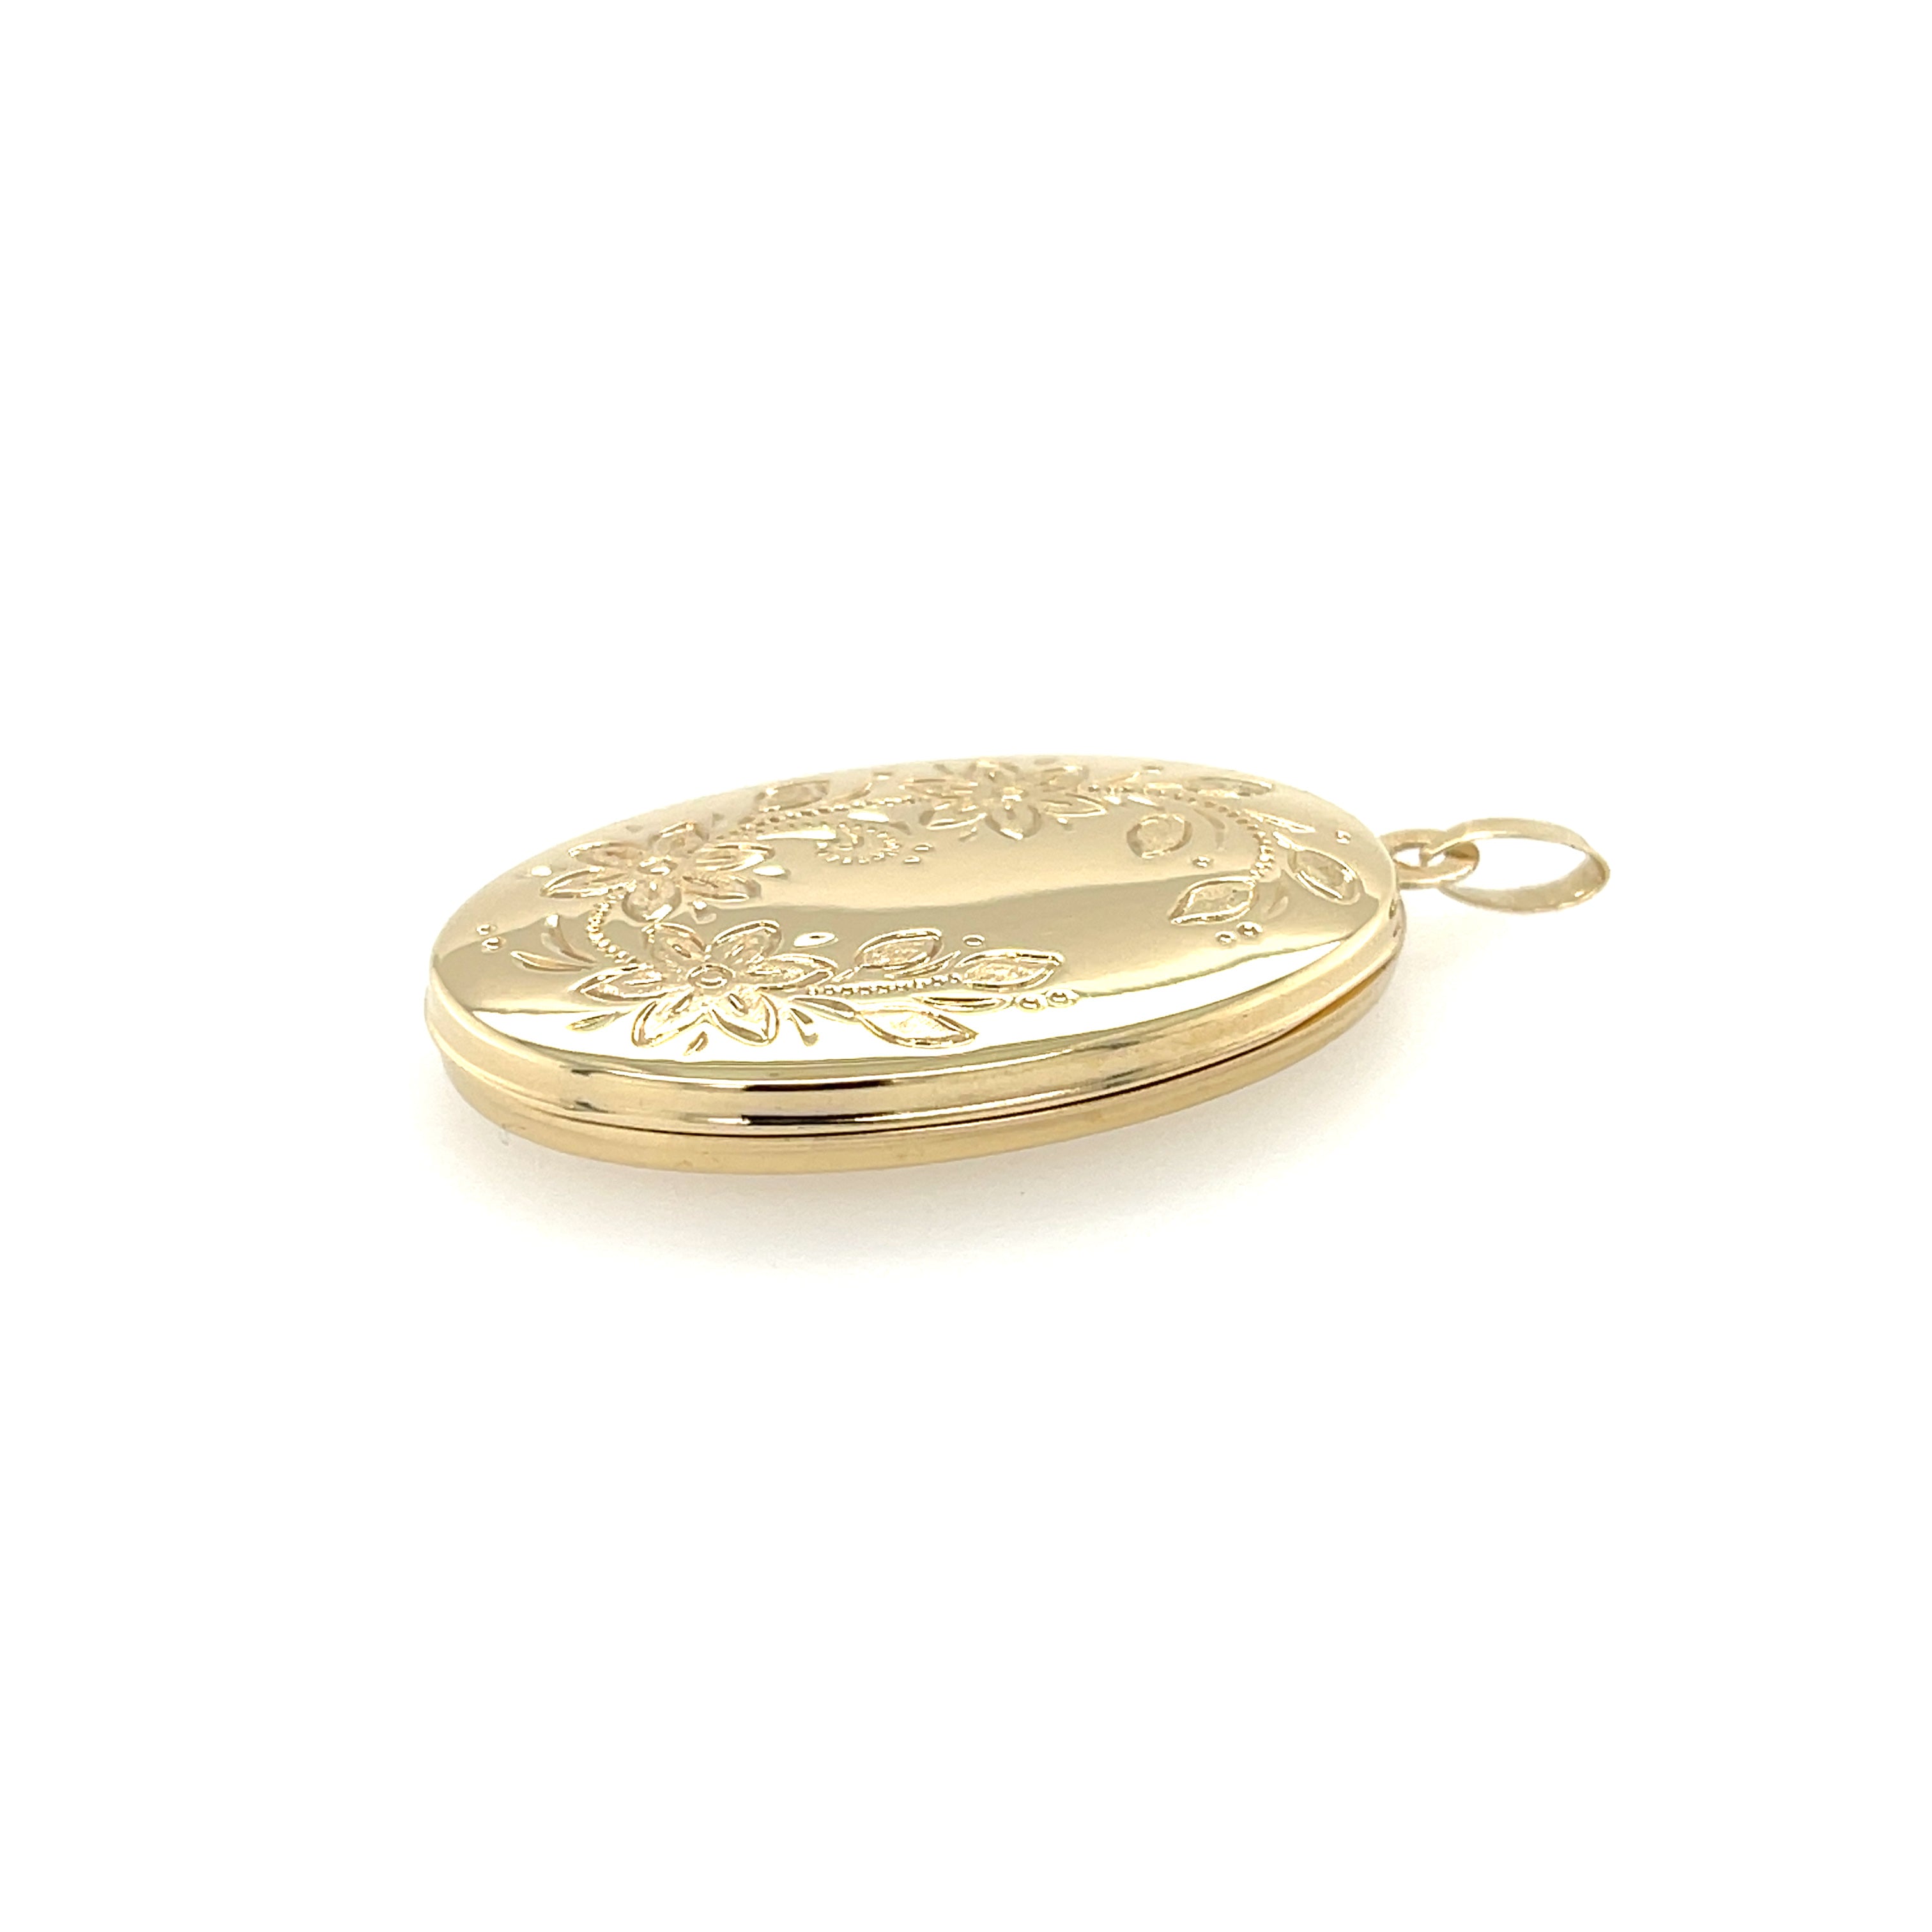 9ct Yellow Gold Oval Floral Engraved Locket Pendant